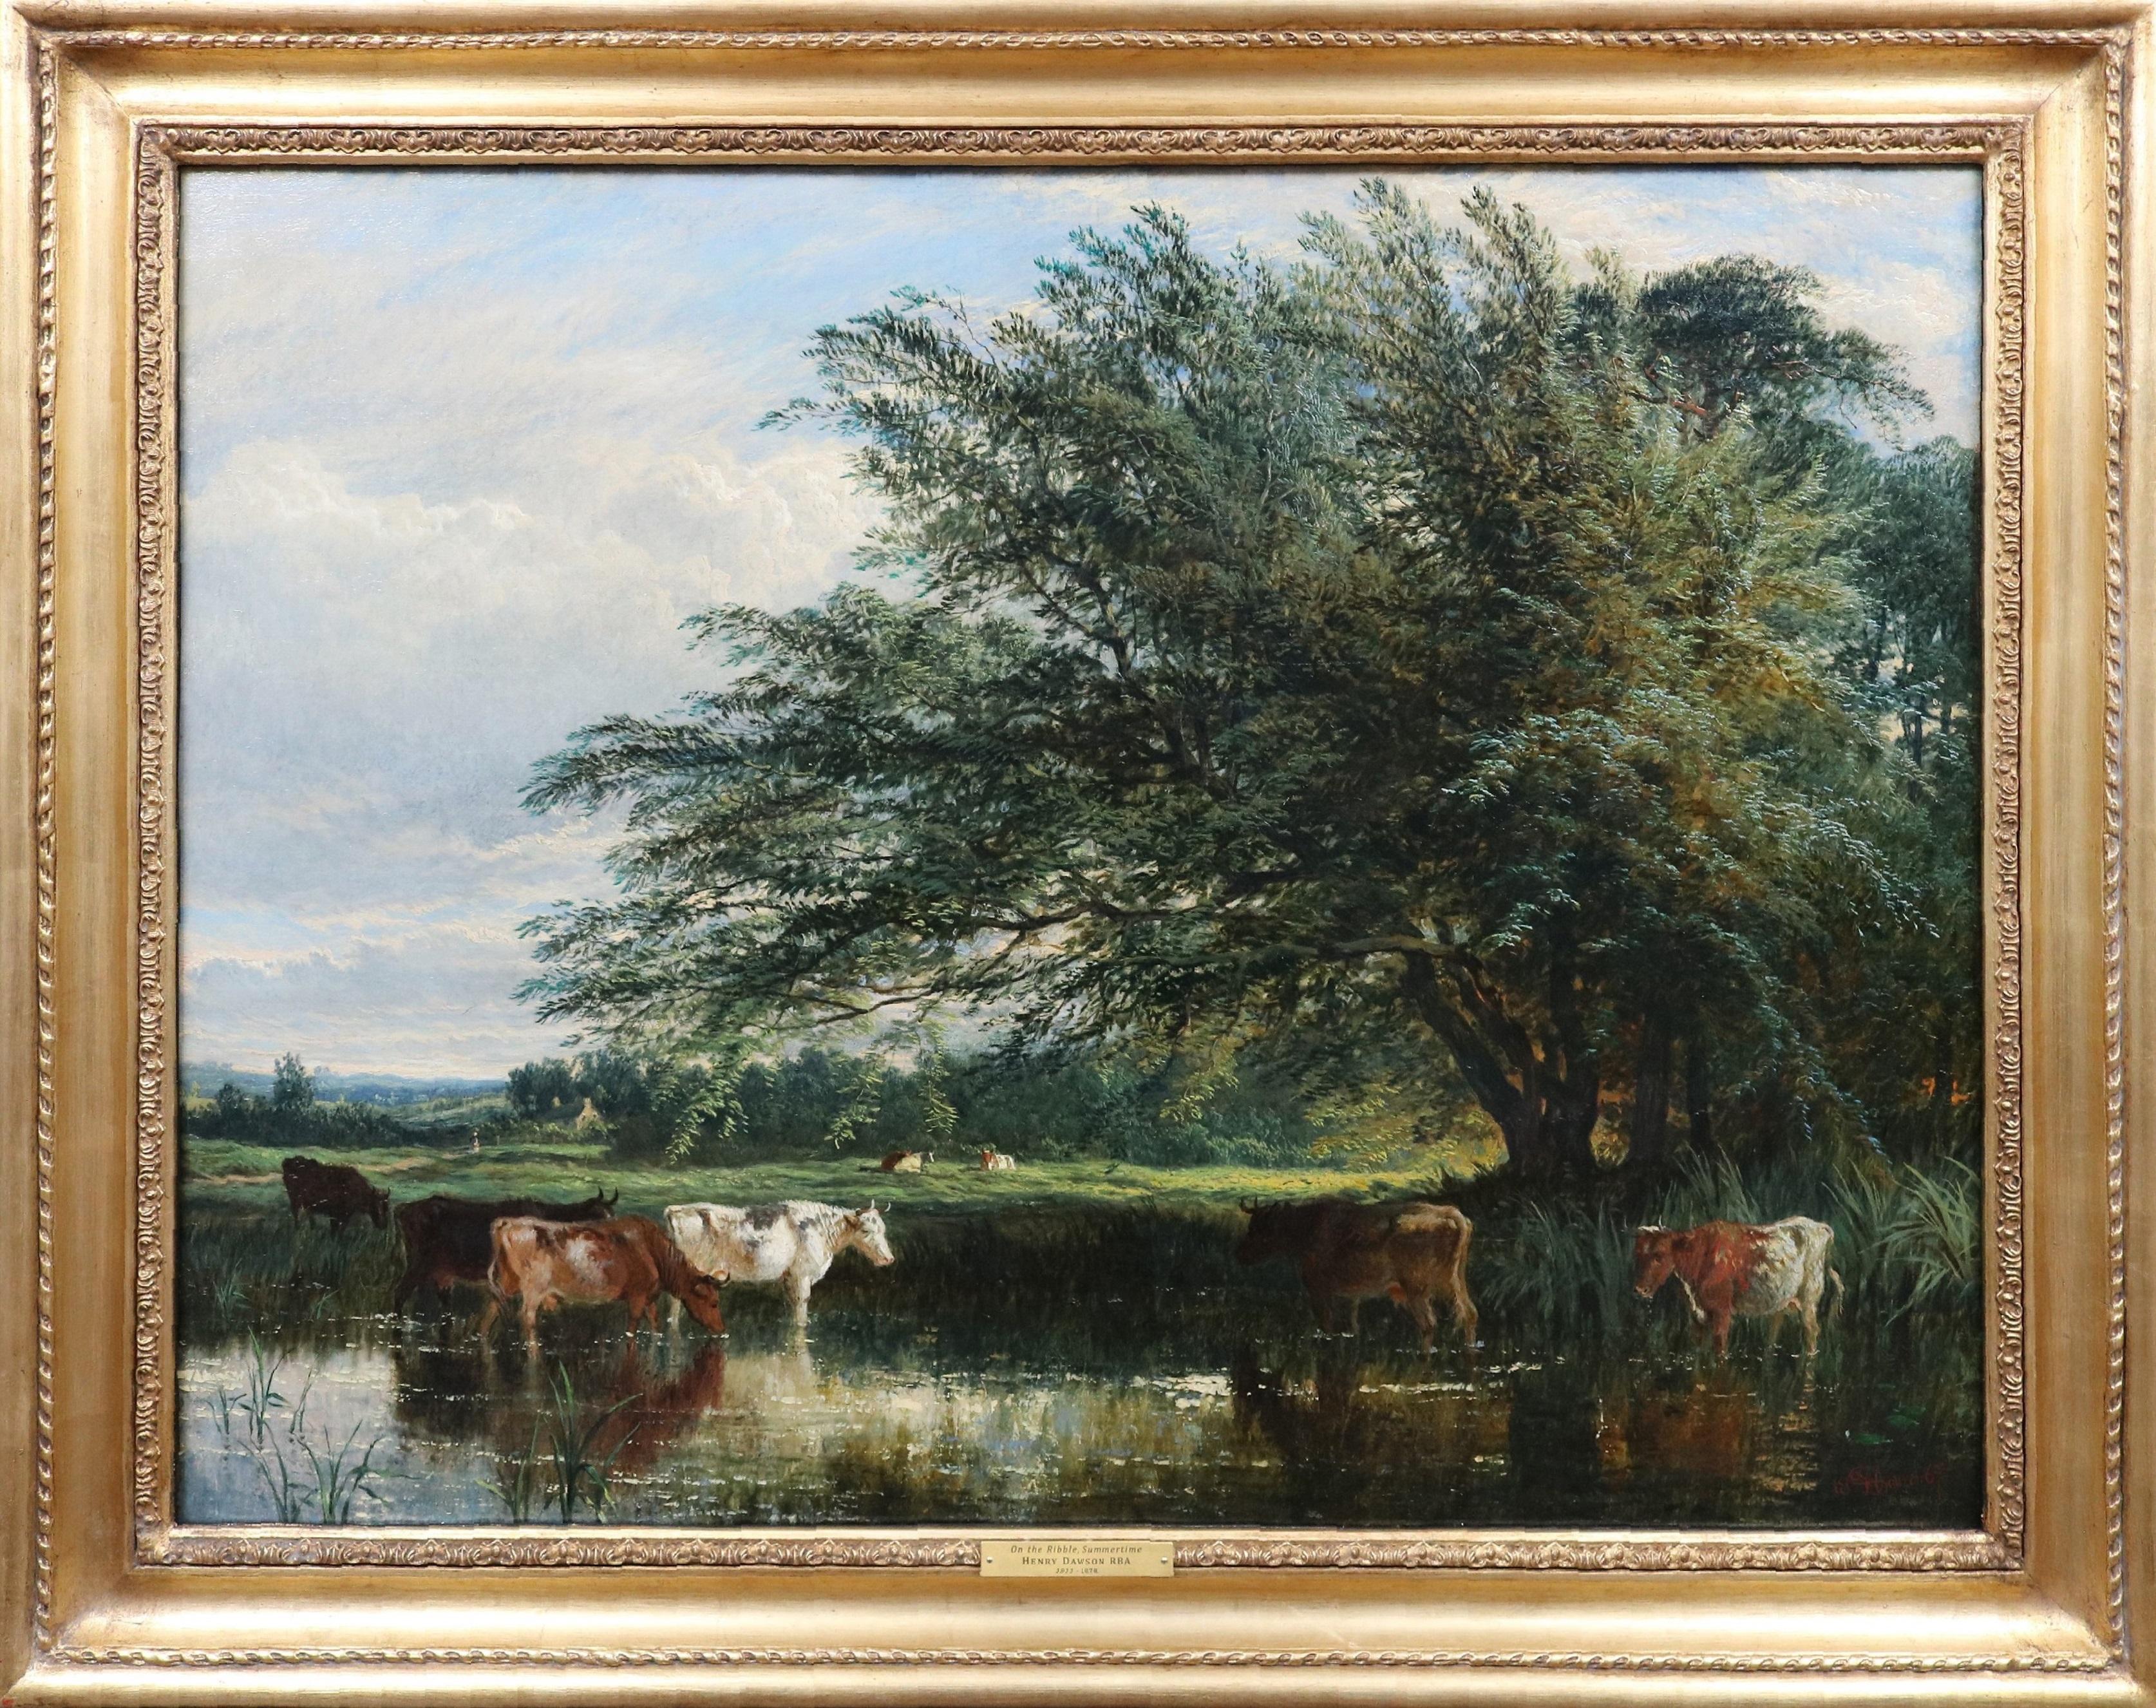 On the Ribble, Summertime - Large 19th Century English Landscape Oil Painting - Brown Animal Painting by Henry Dawson